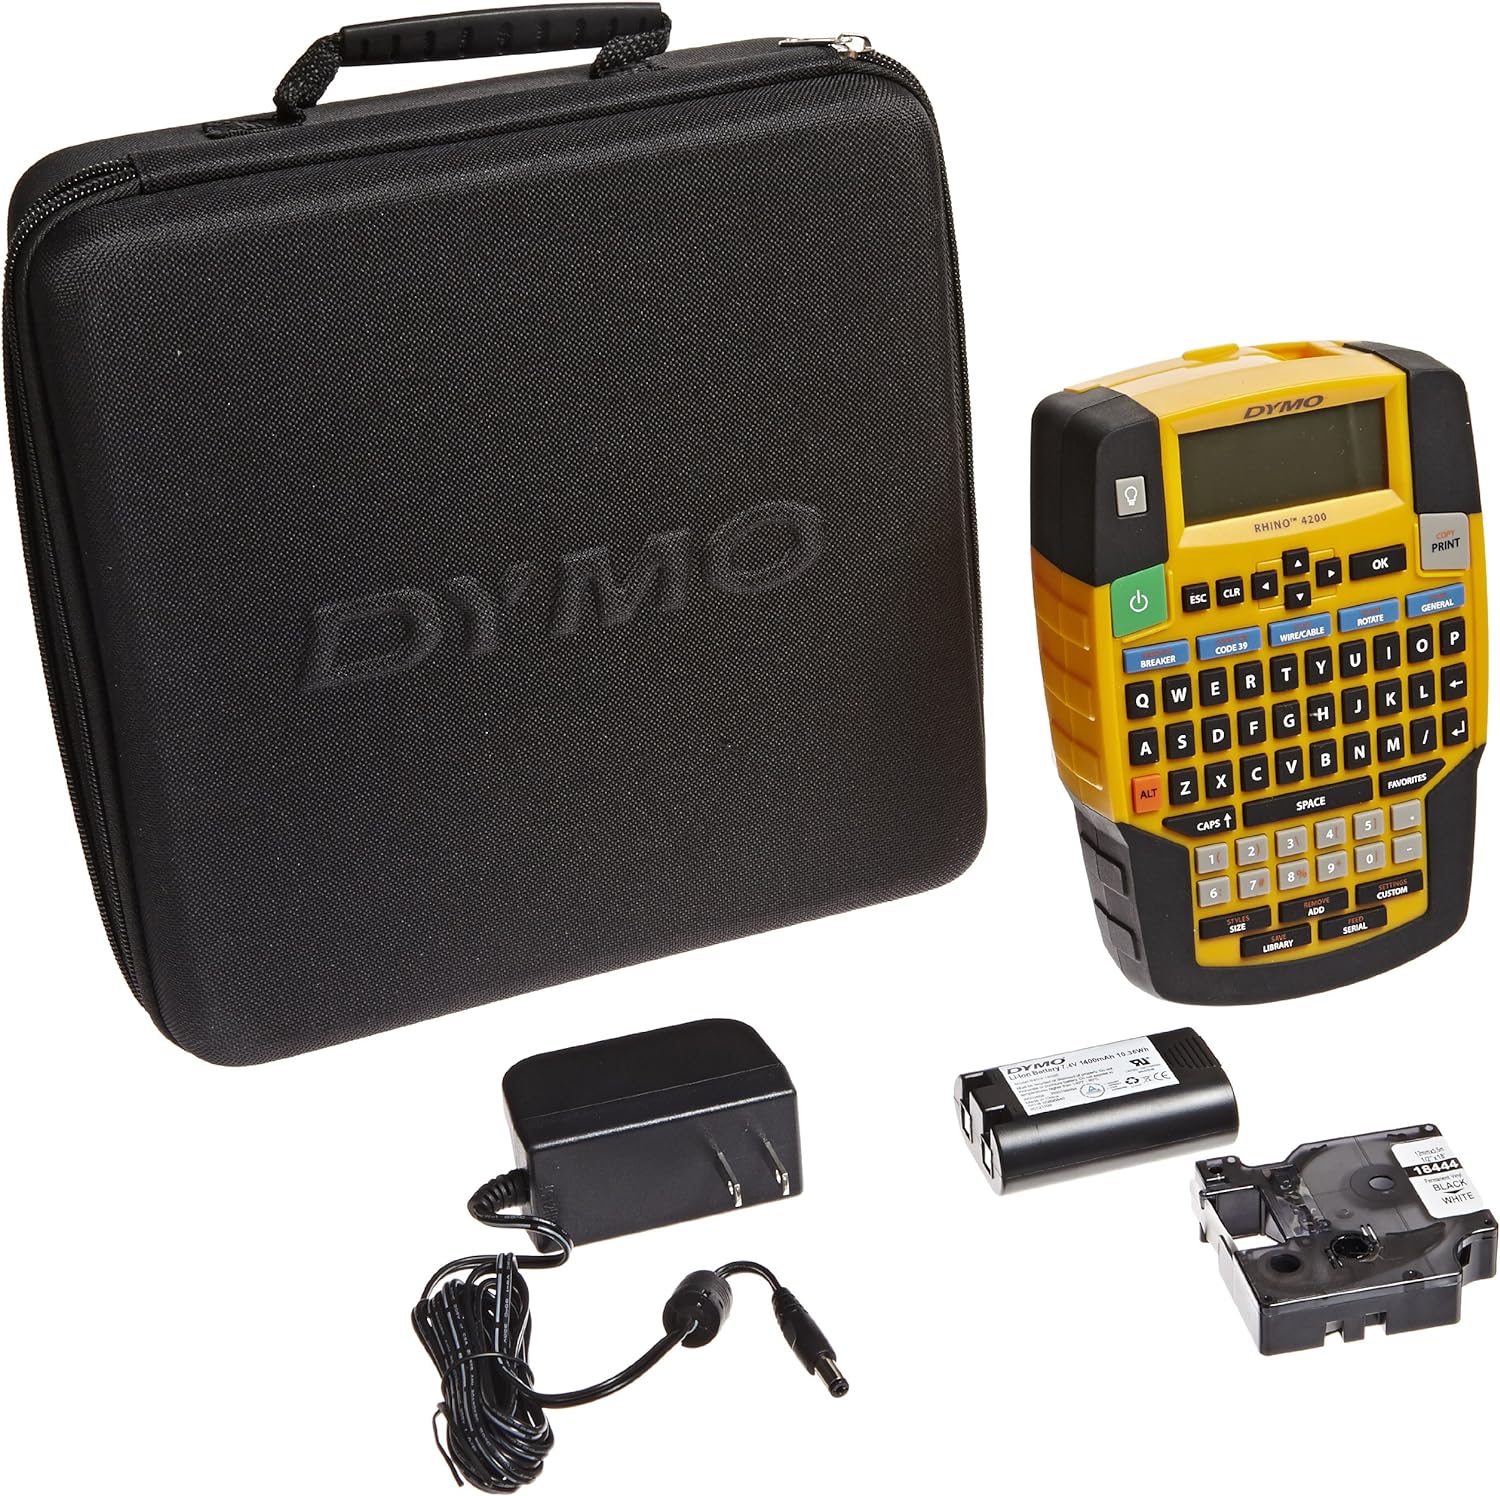 DYMO Rhino 4200 Industrial Label Maker Carry Case Kit with Roll of 1/2 All-Purpose Vinyl Labels, Bla